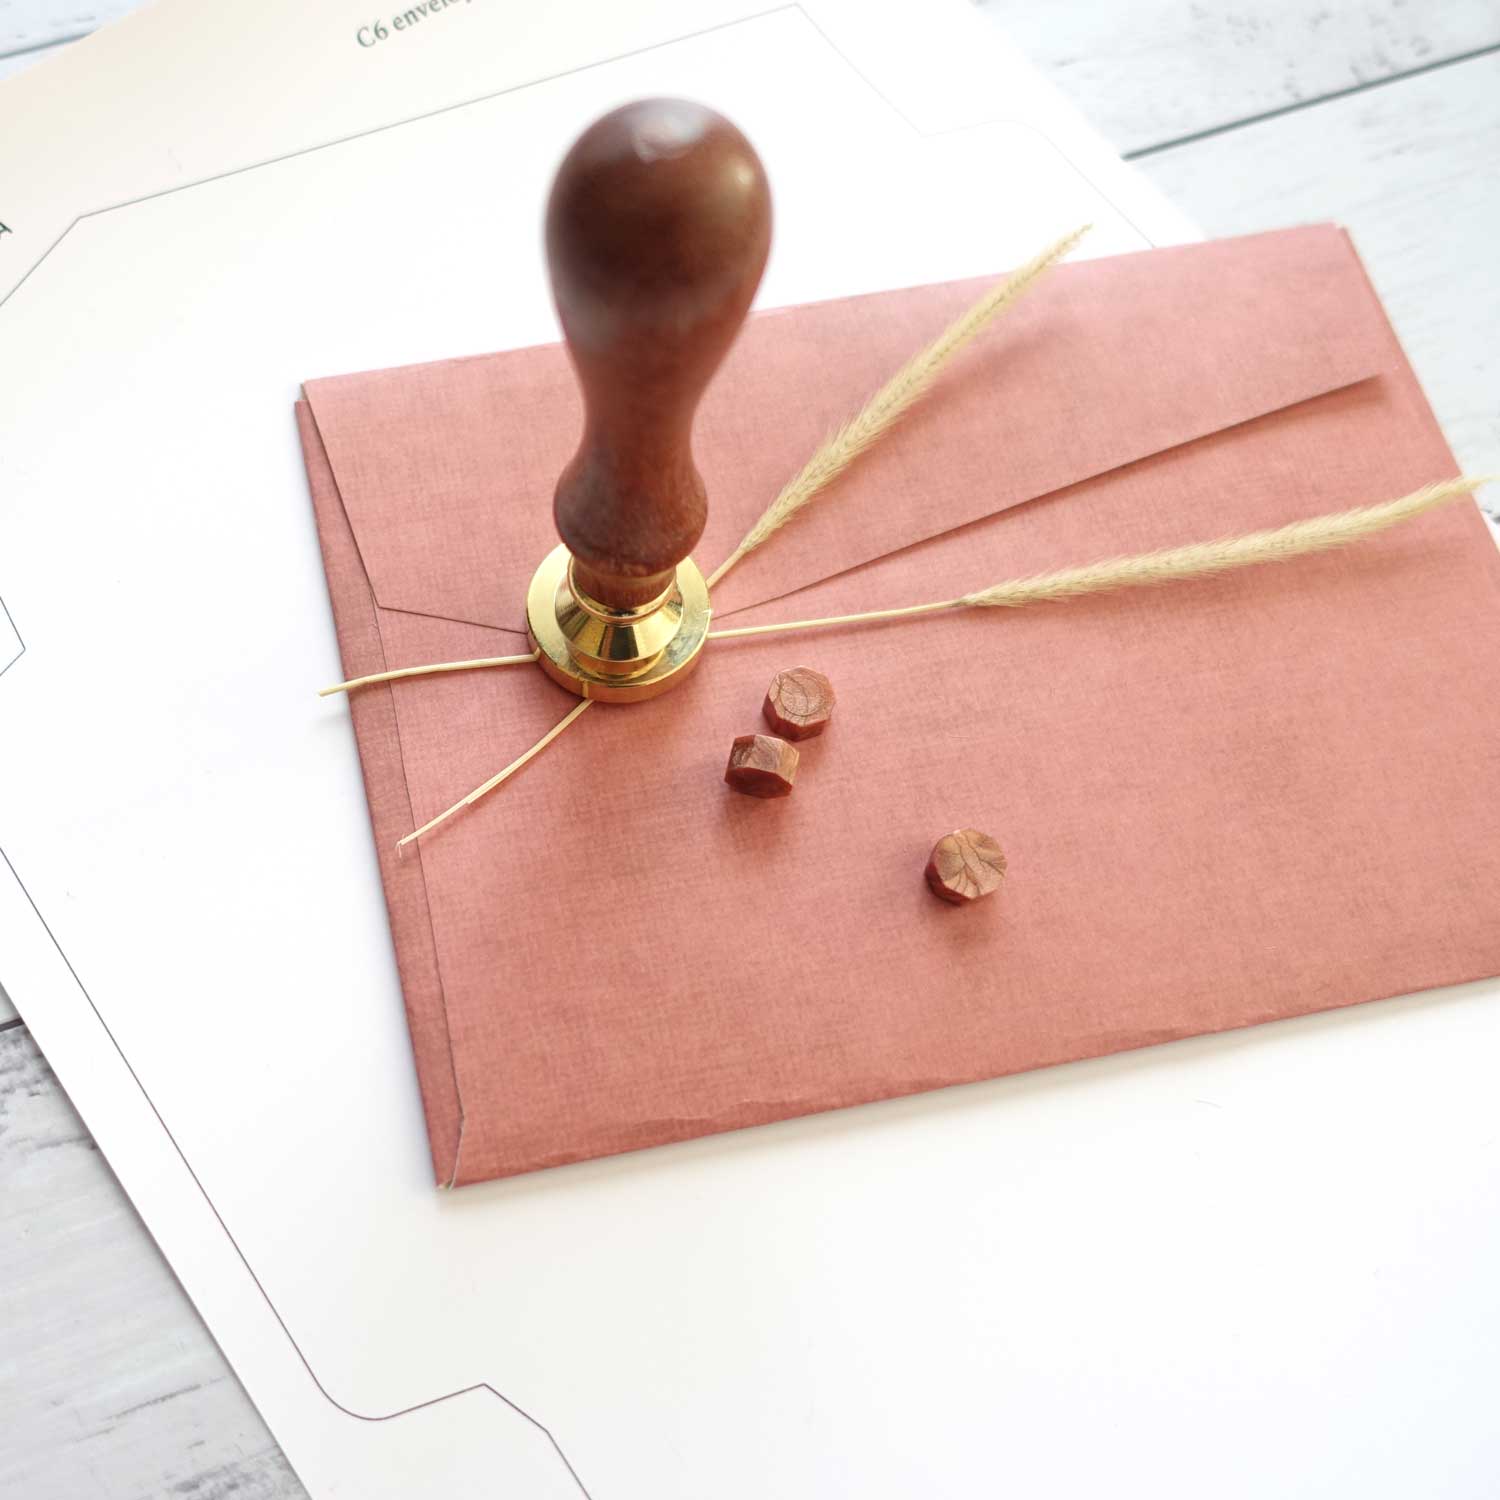 Handmade envelope template free for wax seal